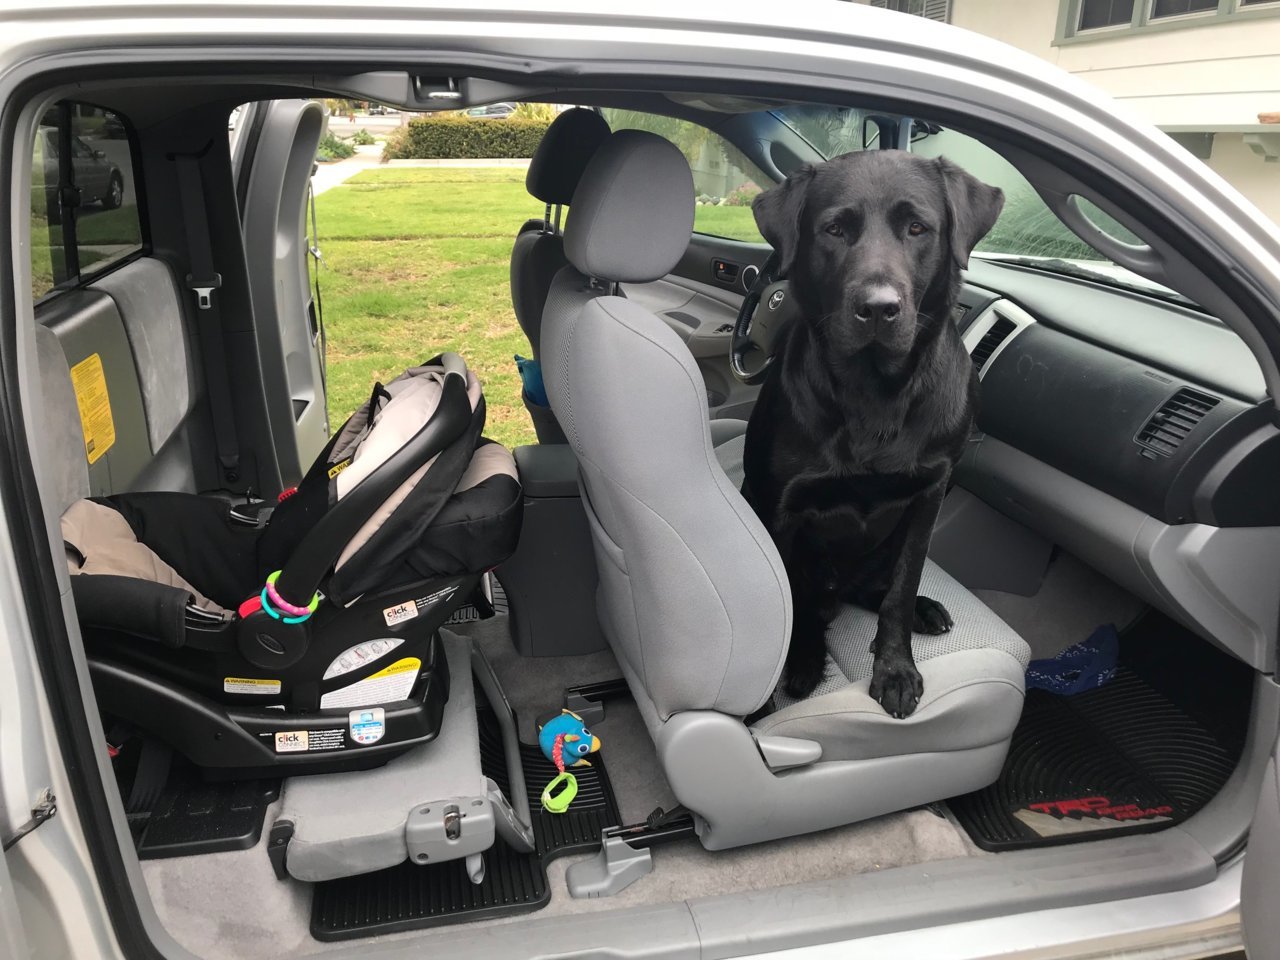 Rear Facing Car Seat In Access Cab, Can You Put Car Seat In Extra Cab